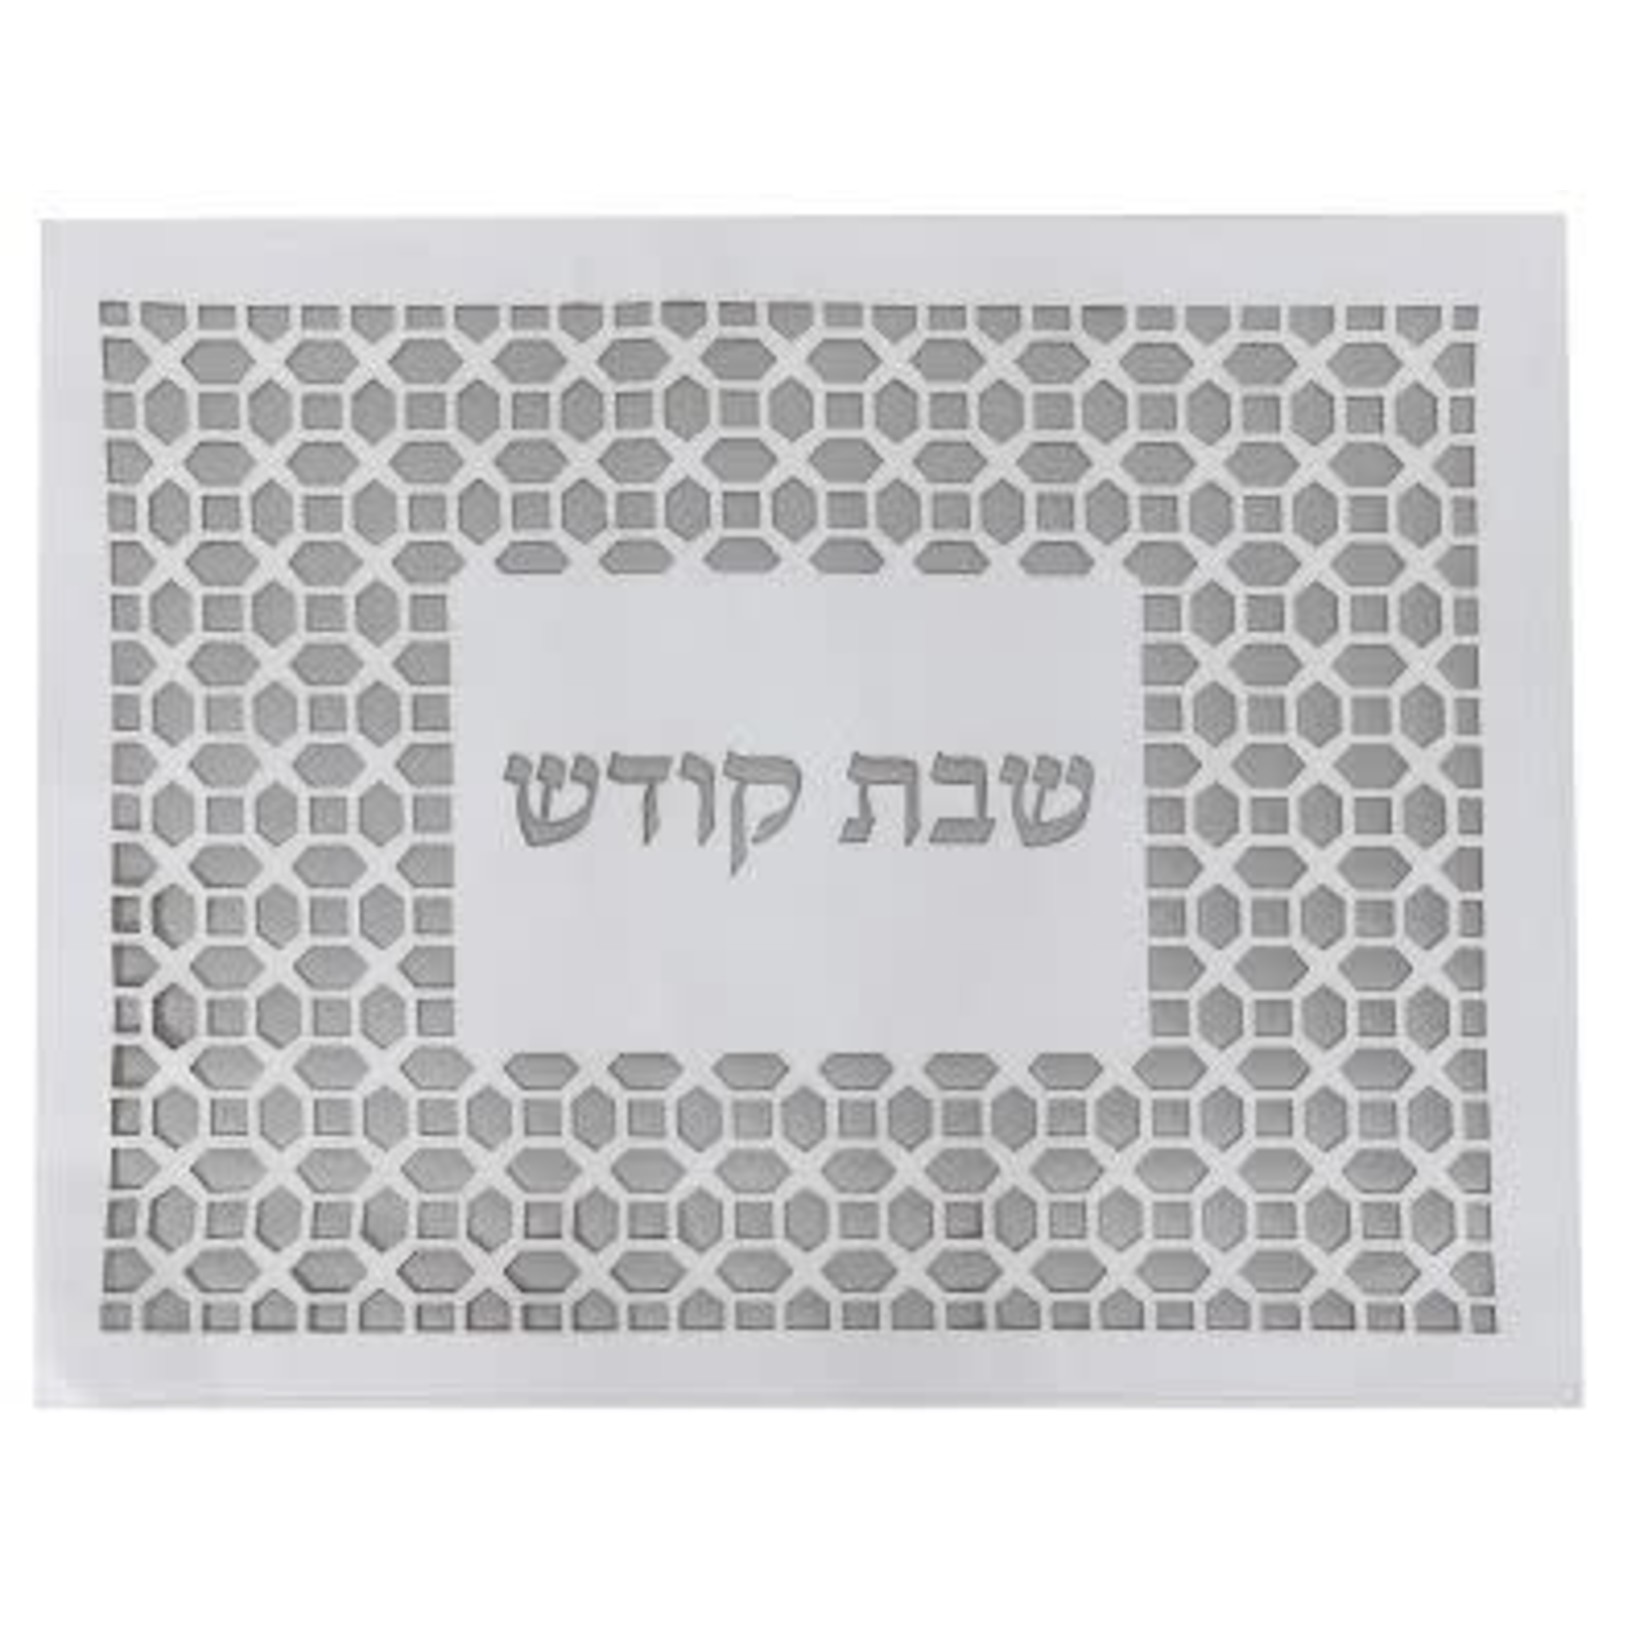 TWS 183113 Leather Look Silver & White Design Challah Cover Laser Cut 17.5" X 21.5"